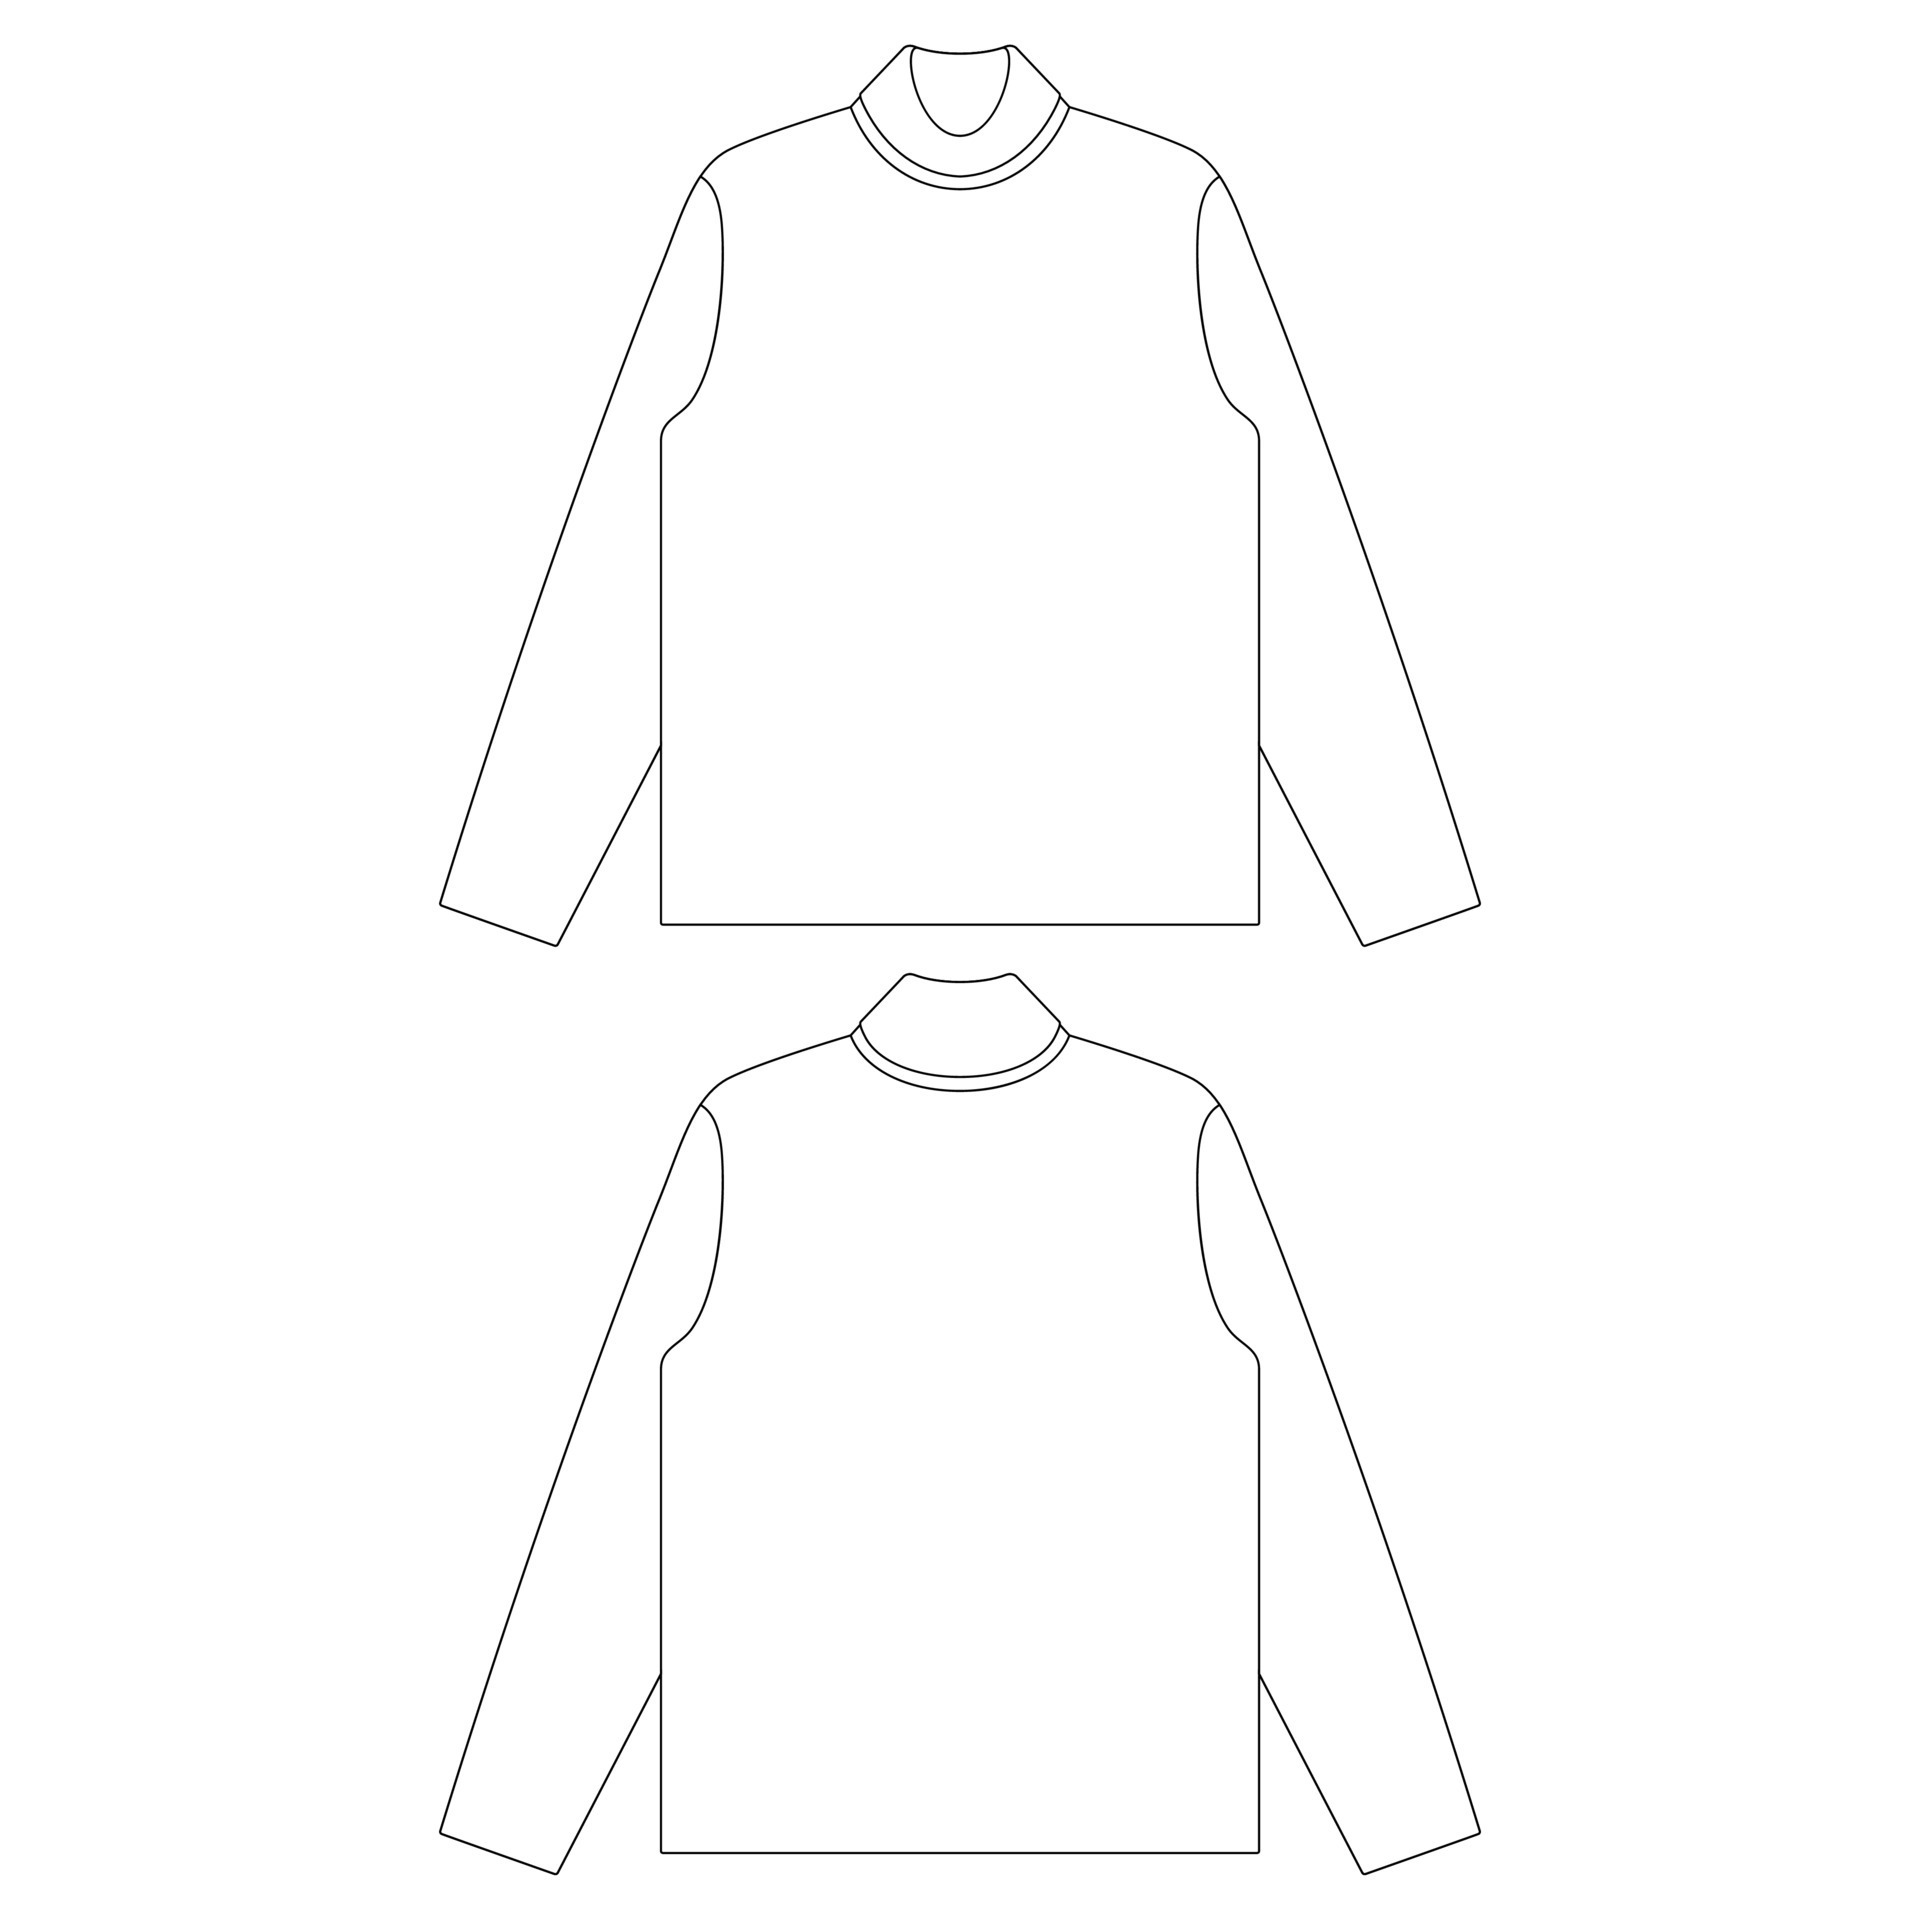 Turtleneck jersey sweater technical fashion illustration with long sleeves,  oversized body. flat outwear apparel template | CanStock